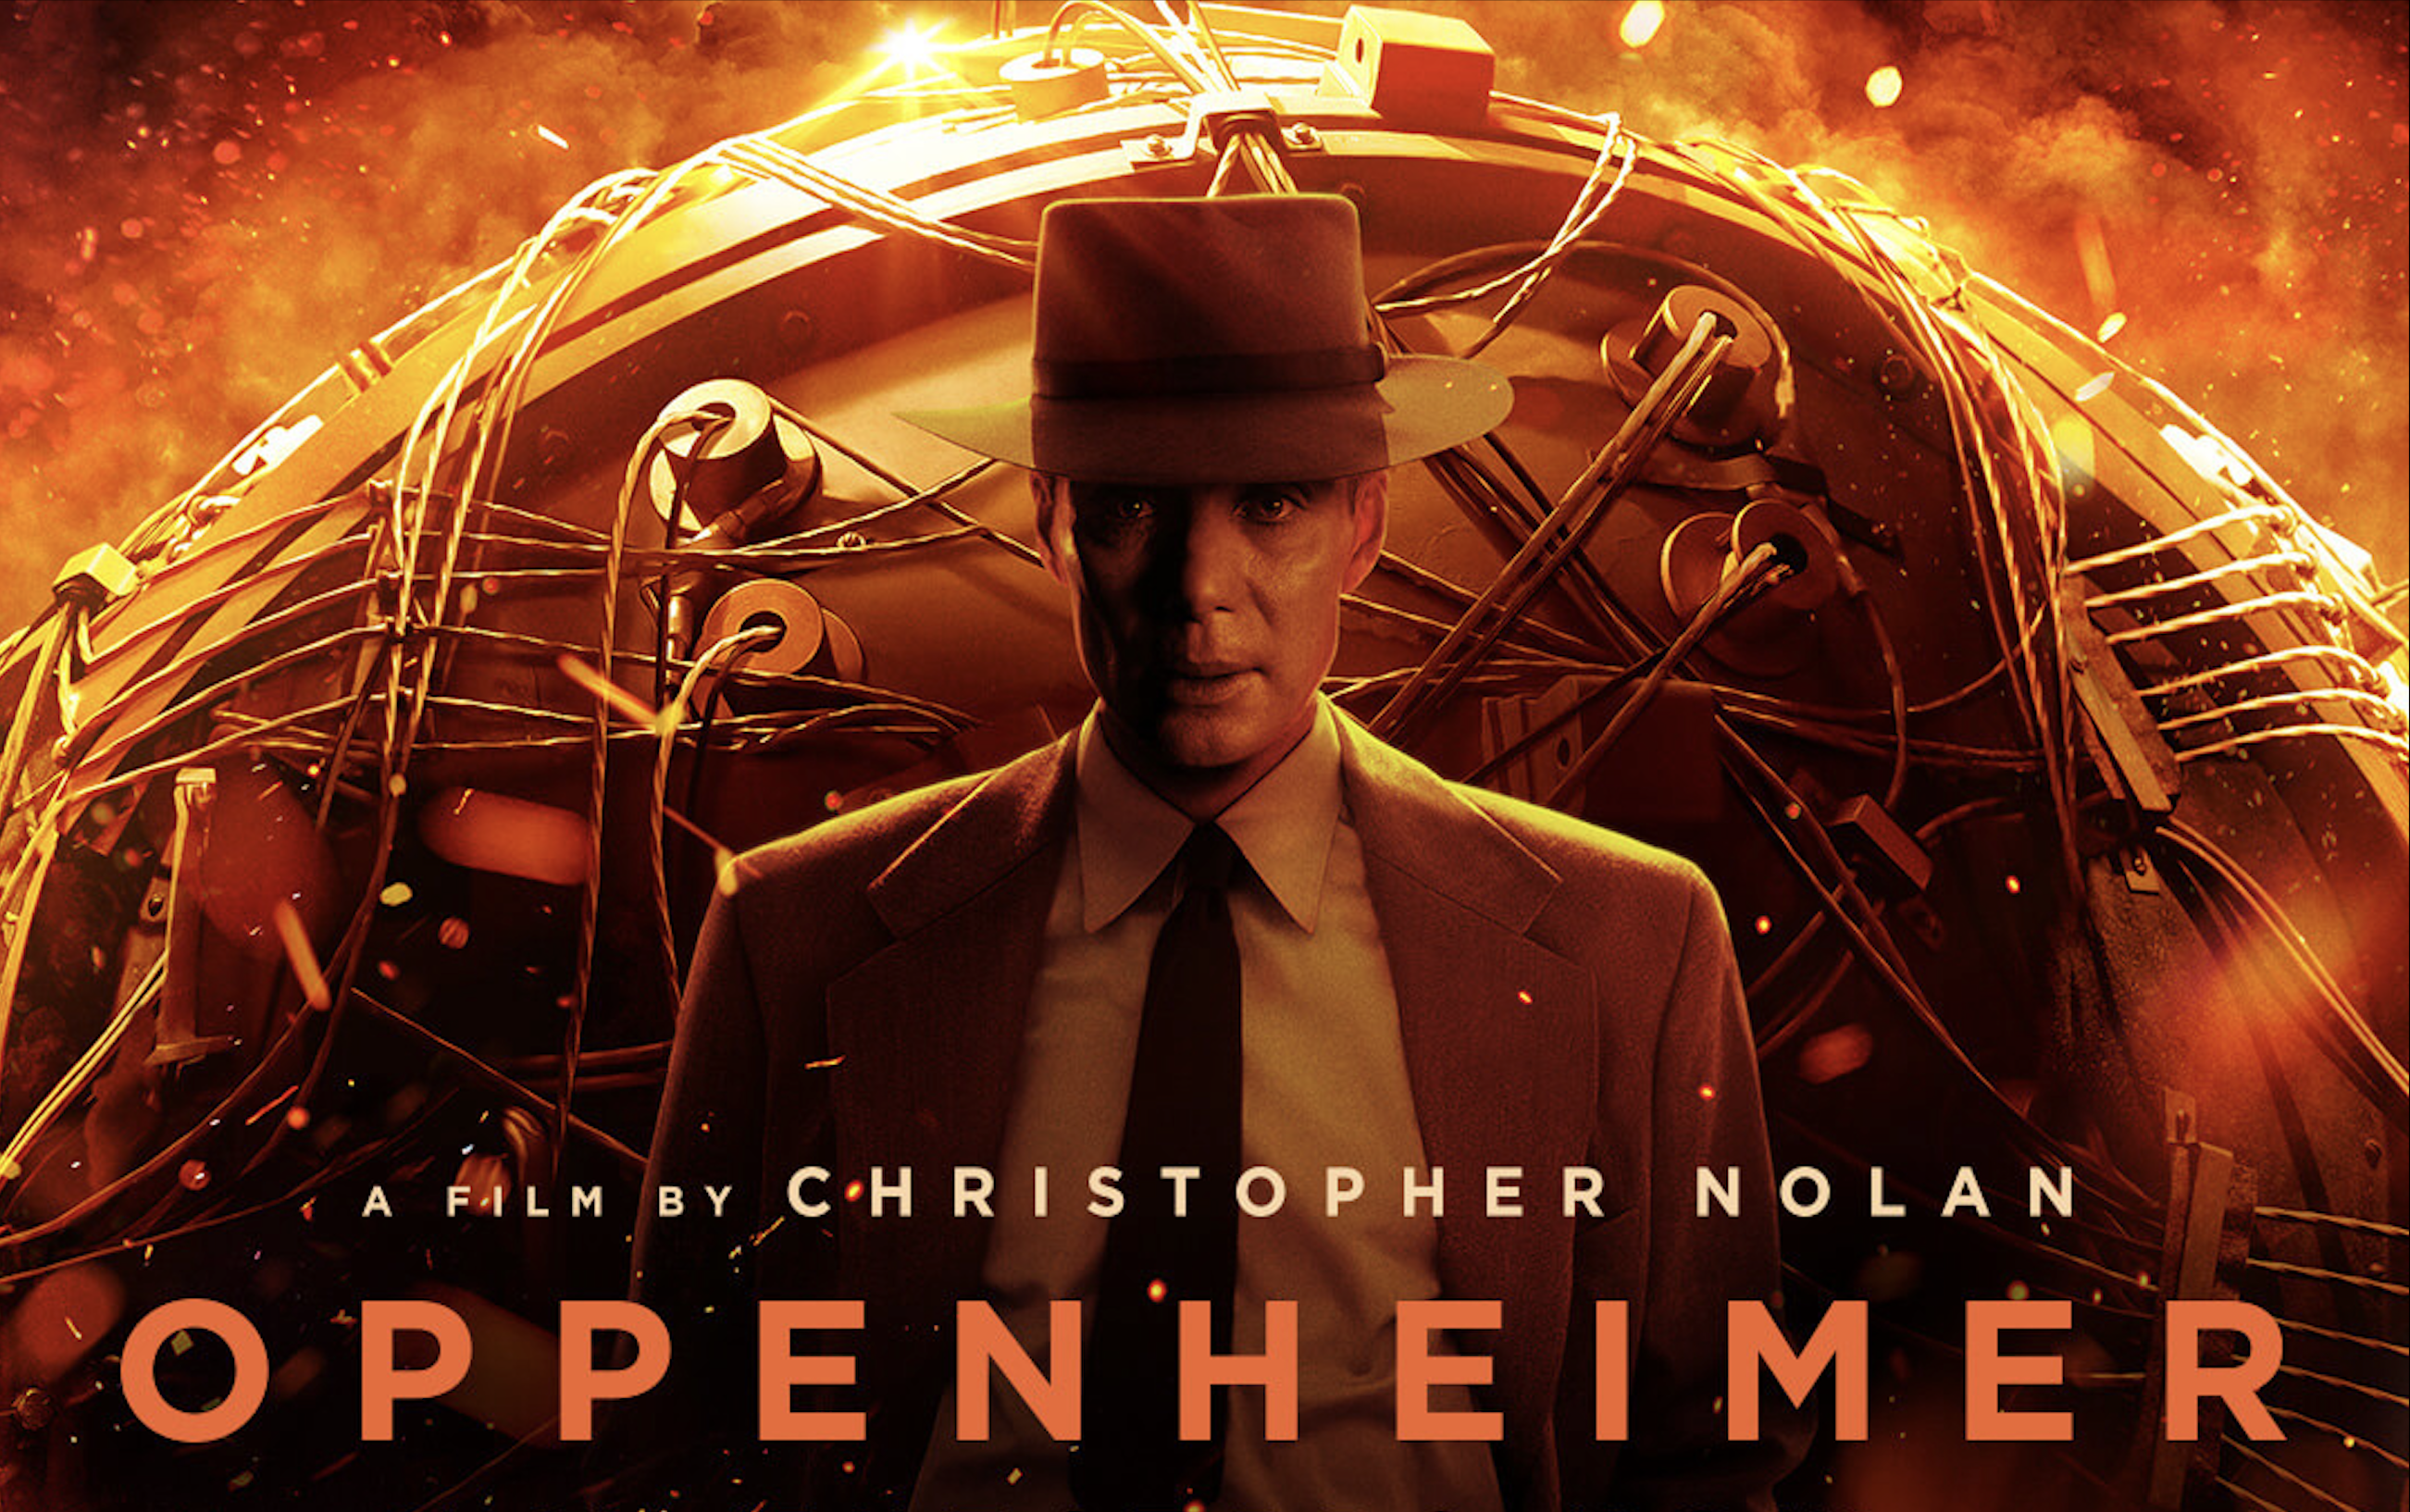 Historical drama Oppenheimer leads all Oscar nominations with 13, including Best Picture